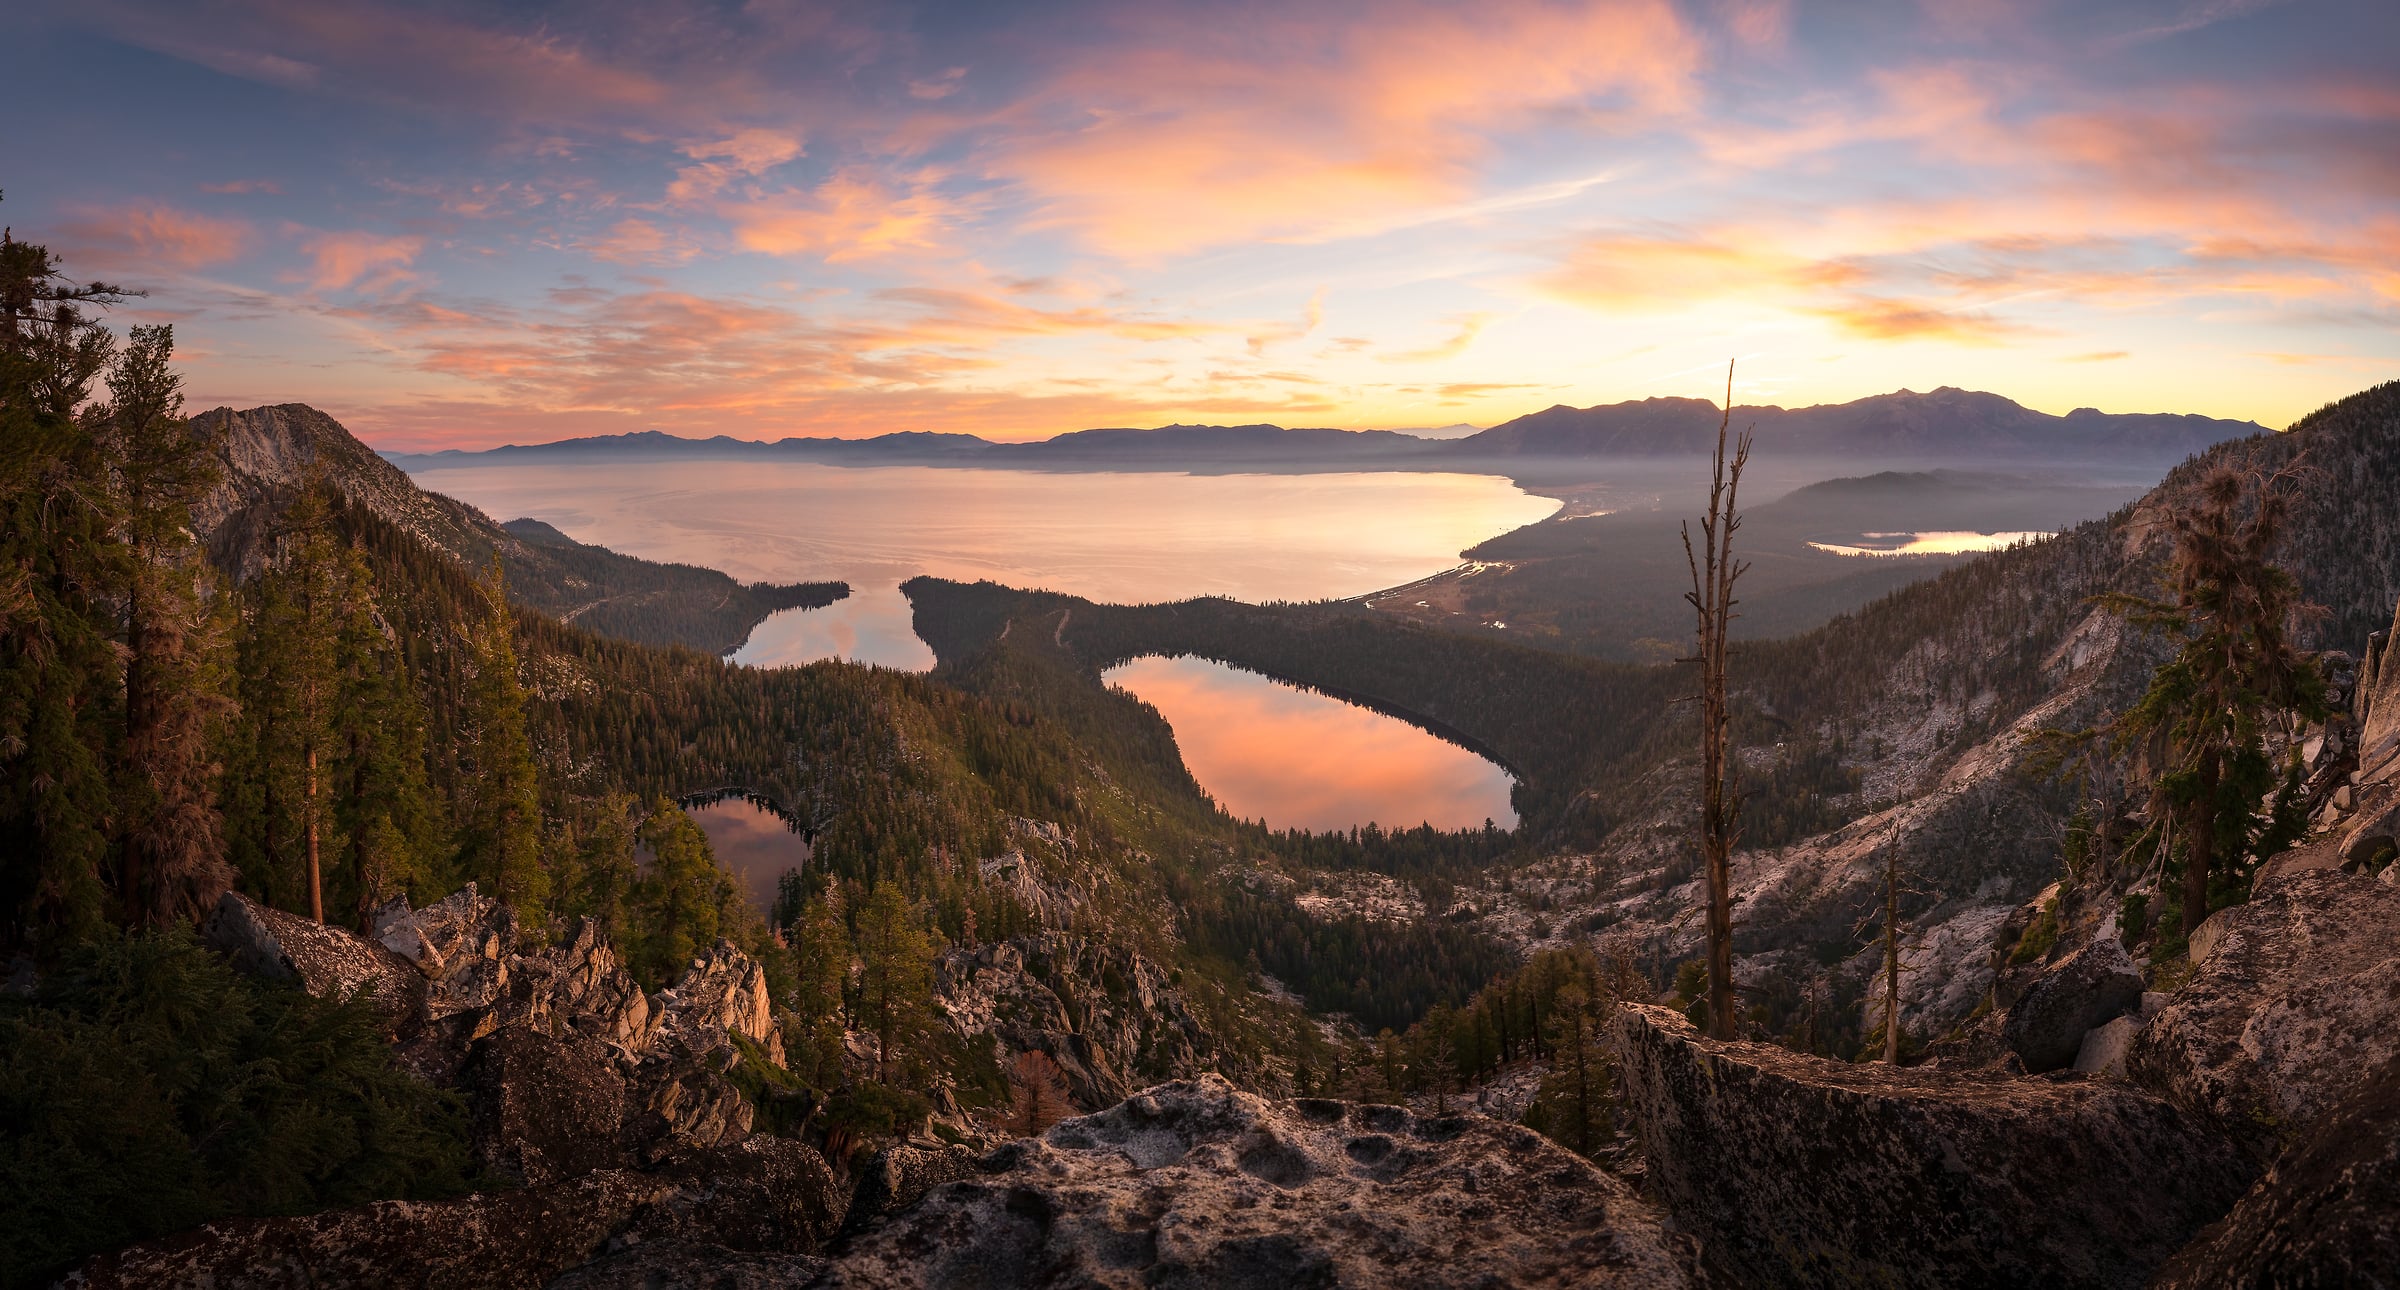 154 megapixels! A very high resolution, large-format VAST photo print of Lake Tahoe at sunrise; landscape photograph created by Jeff Lewis.